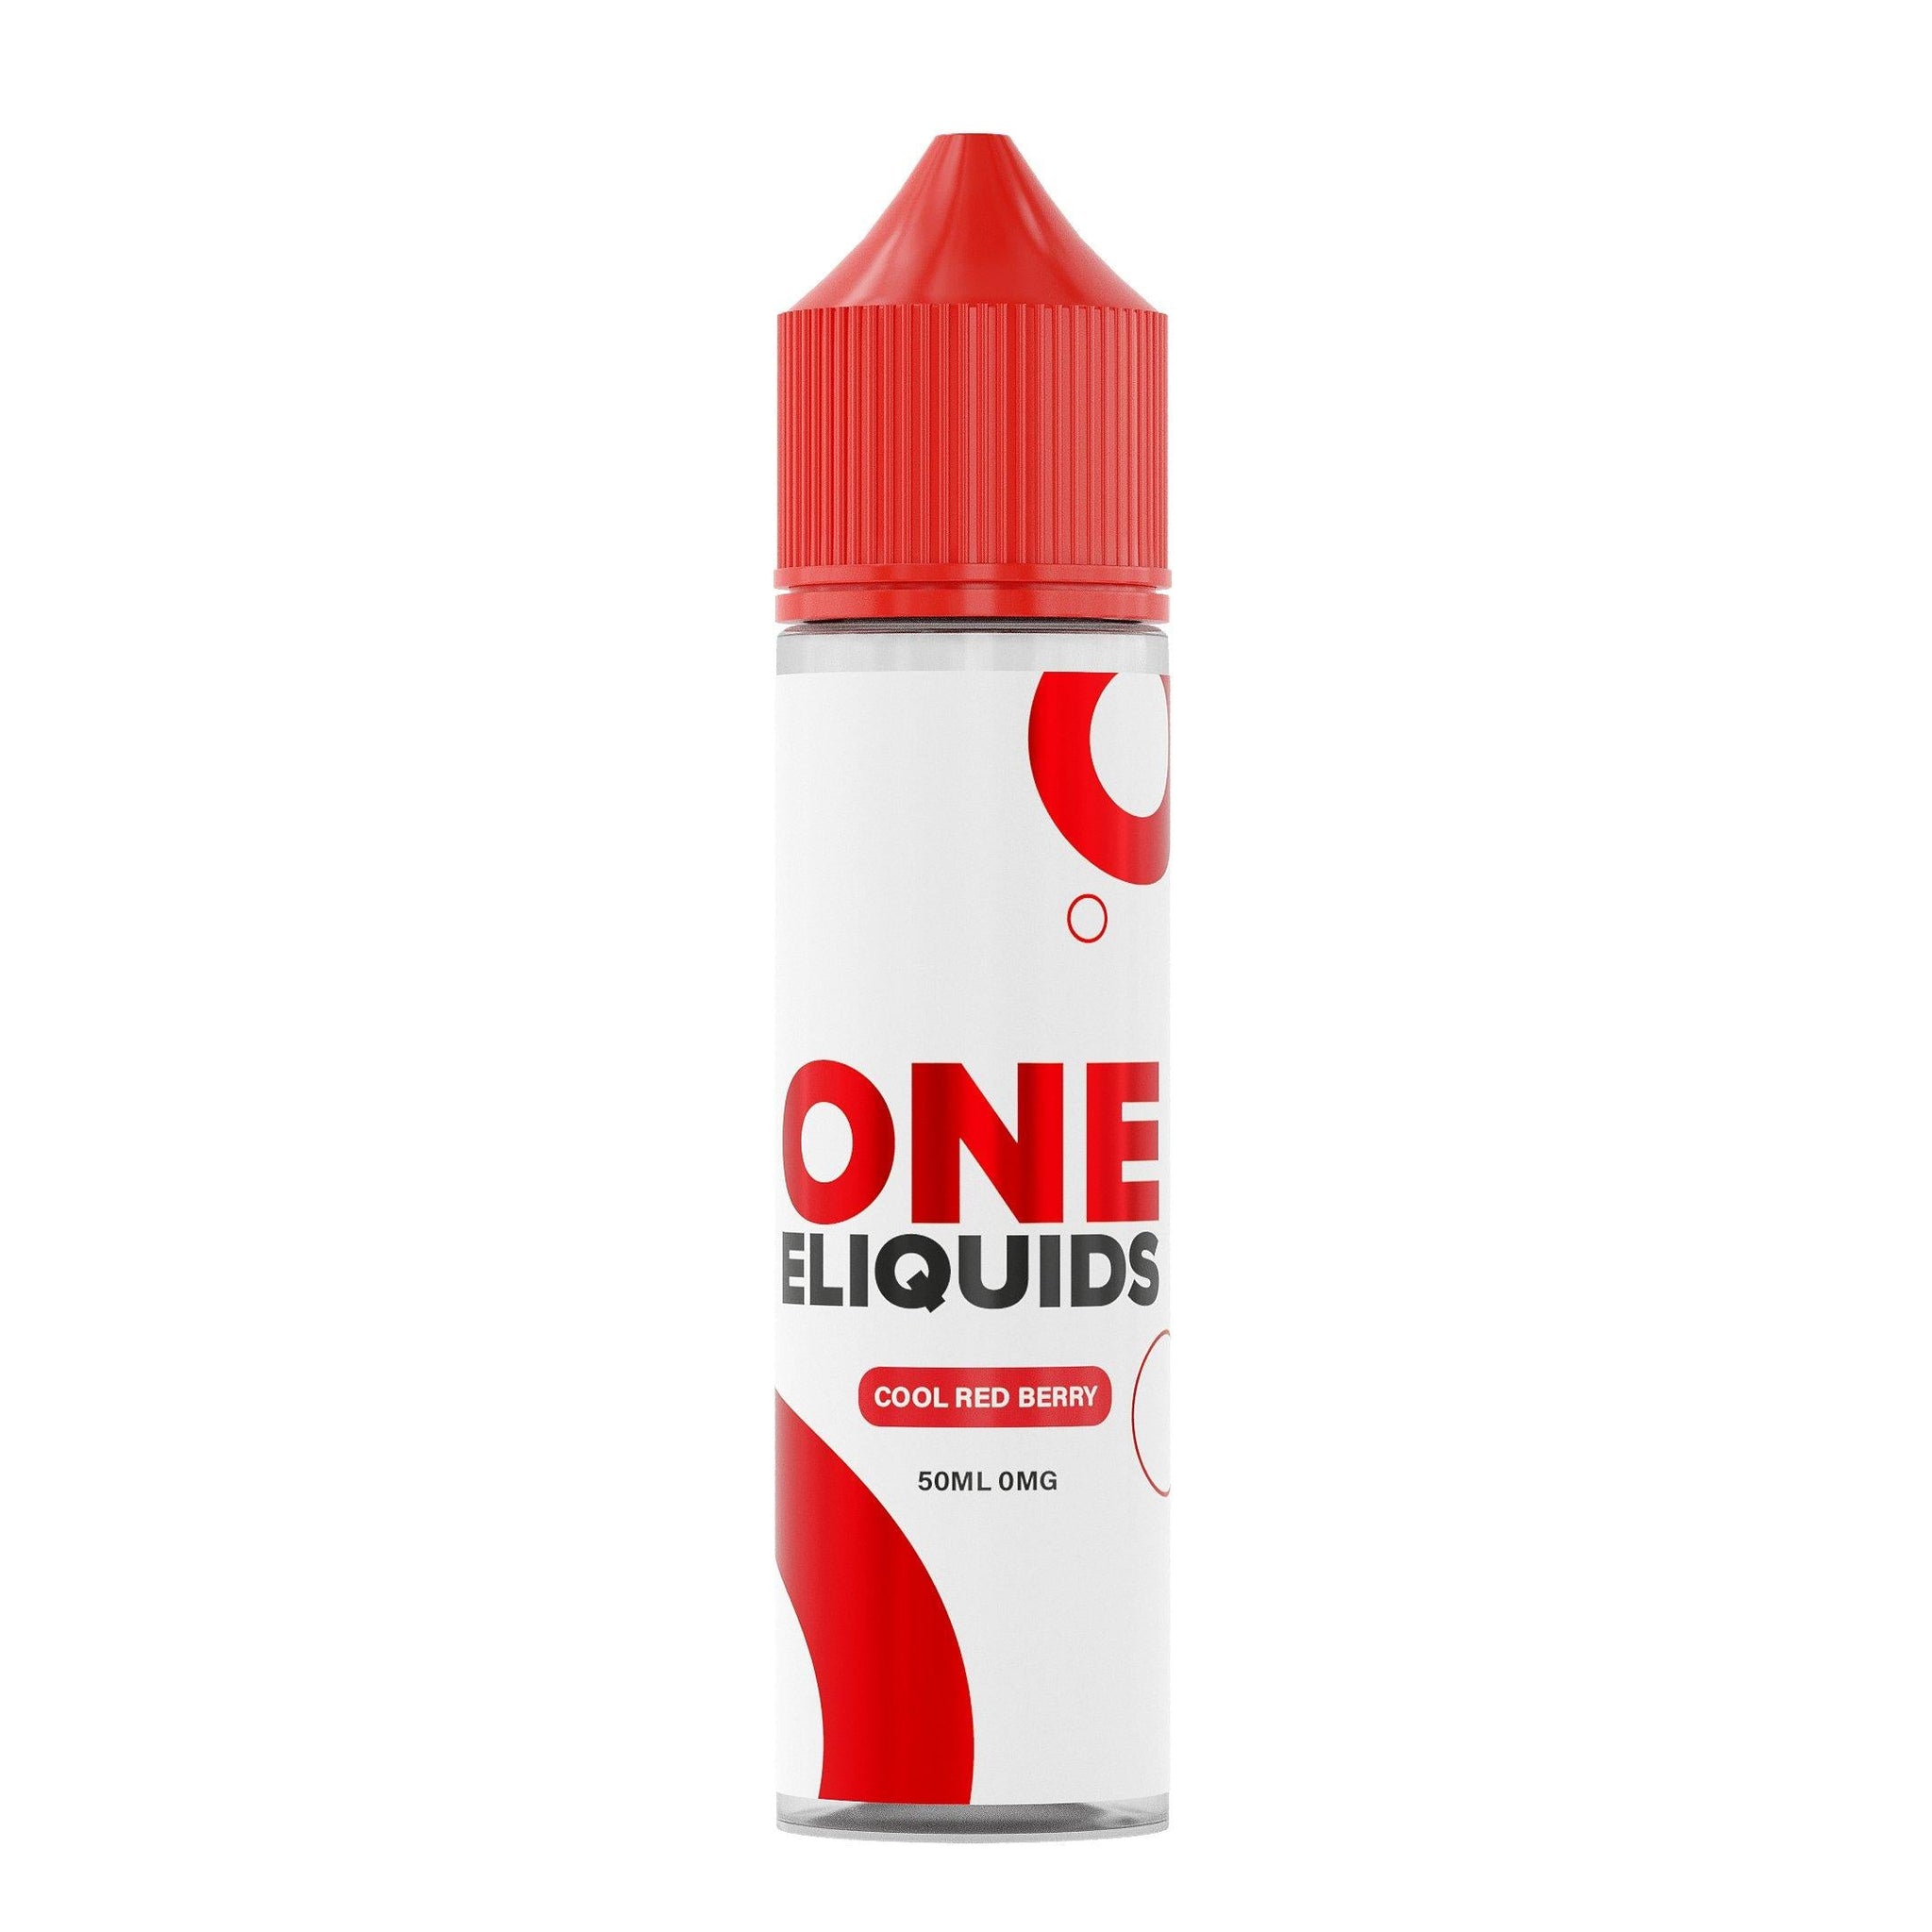 Cool Red Berry - One Eliquids